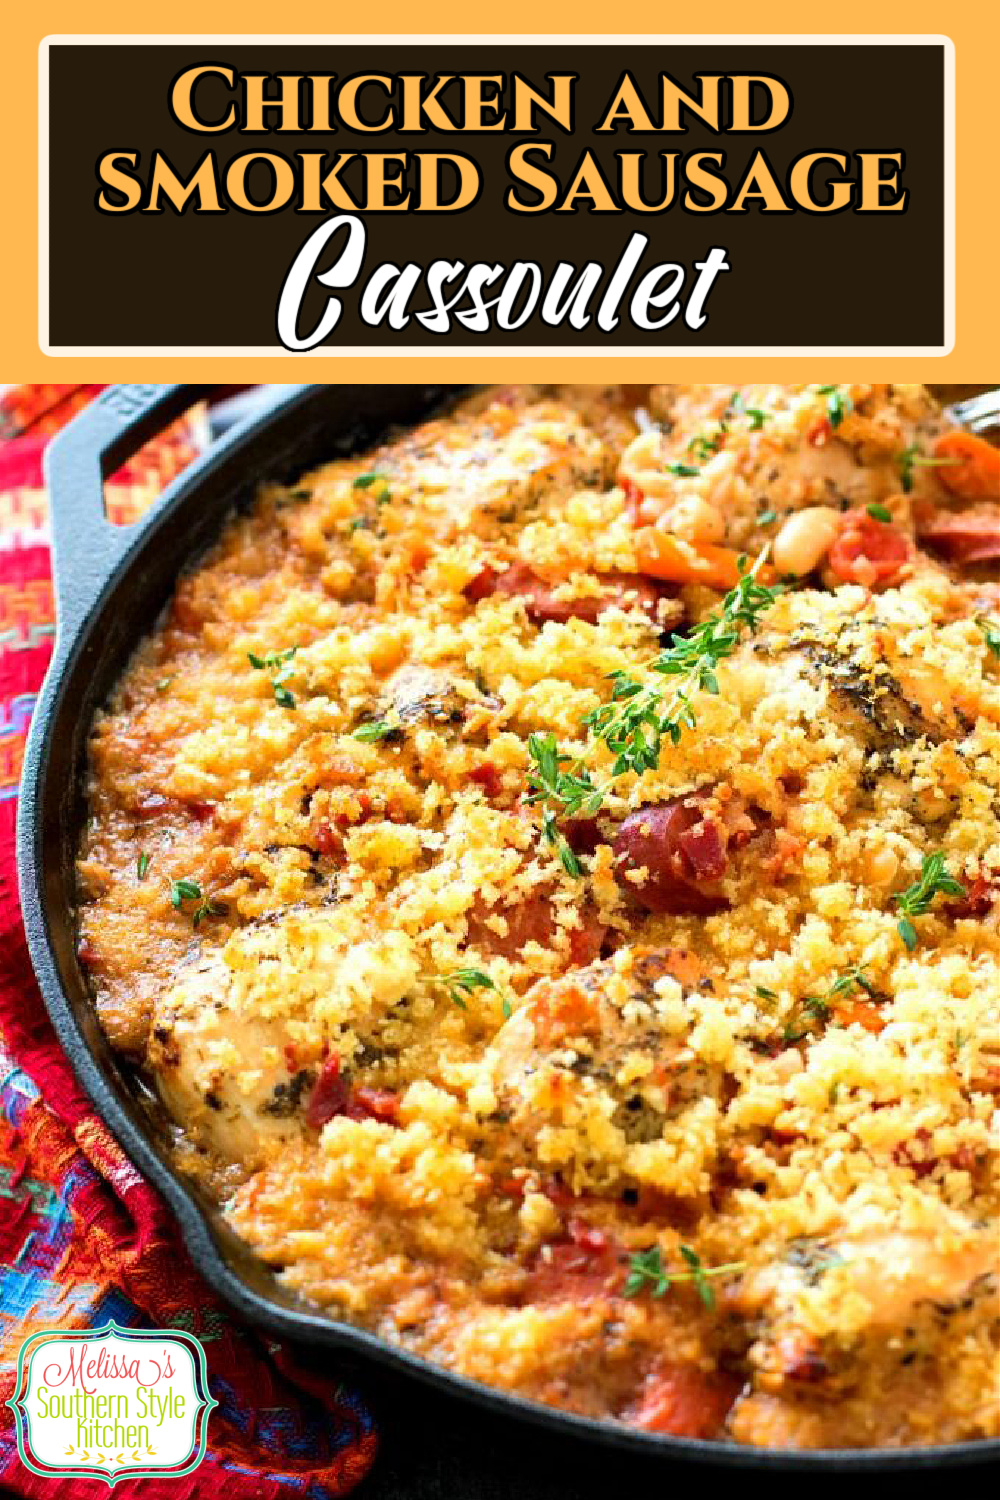 Seasoned chicken breasts and smoked sausages are simmered with fragrant vegetables then baked until the topping is crispy and golden #chickencassoulet #chickencasserolerecipes #chickenbreastrecipes #skilletmeals #southernfood #southernrecipes #food #recipes #dinnerideas #smokedsausages